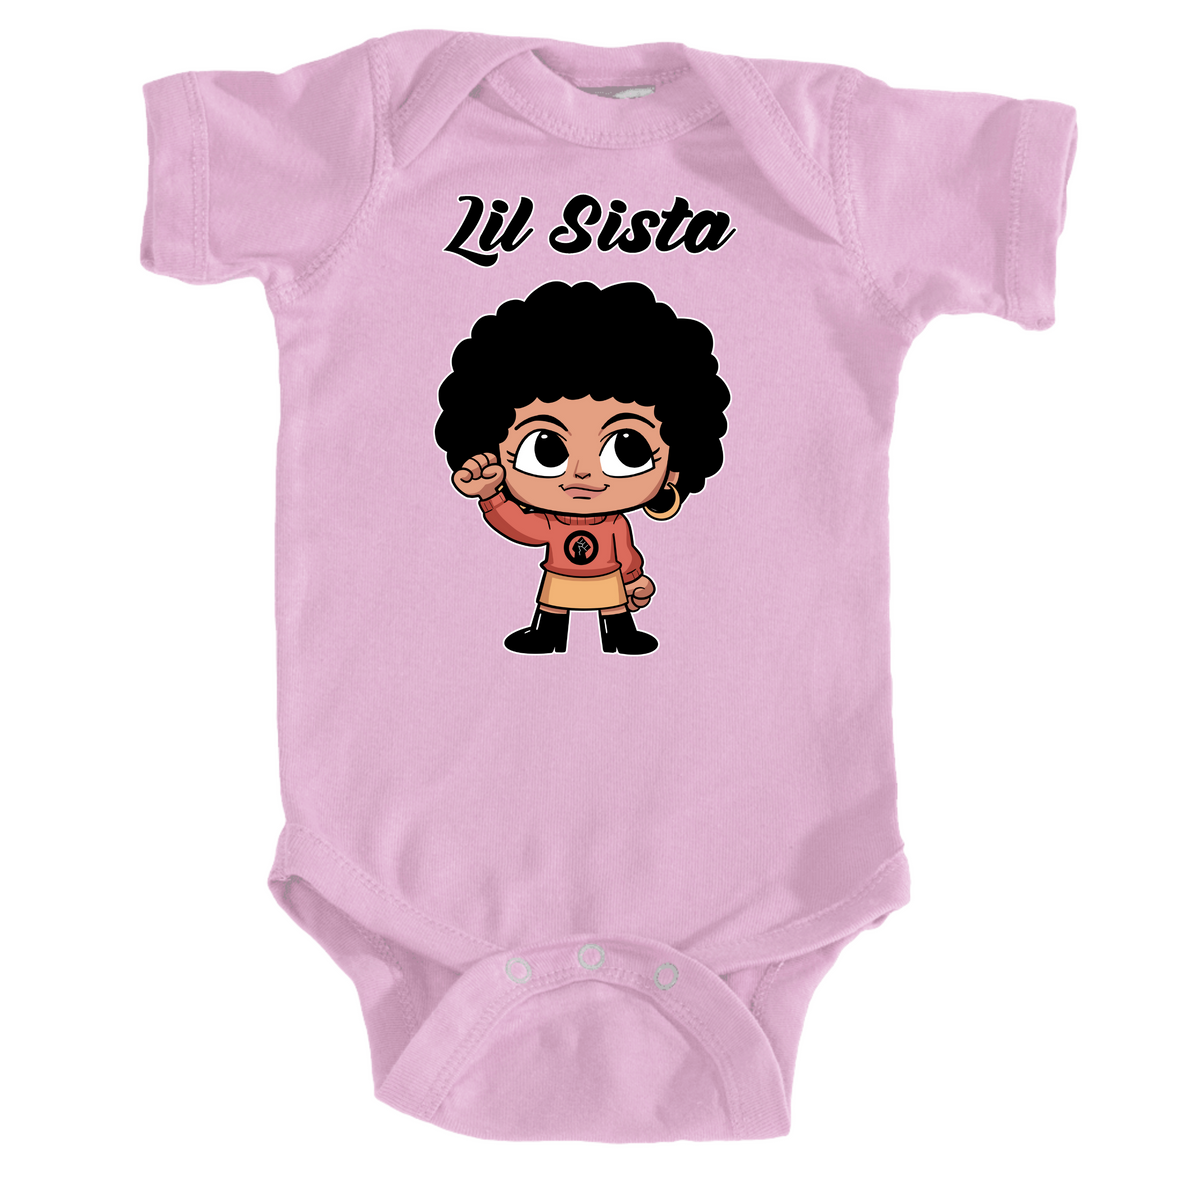 Lil Leaders® Baby & Toddler - Girls - Lil Sista